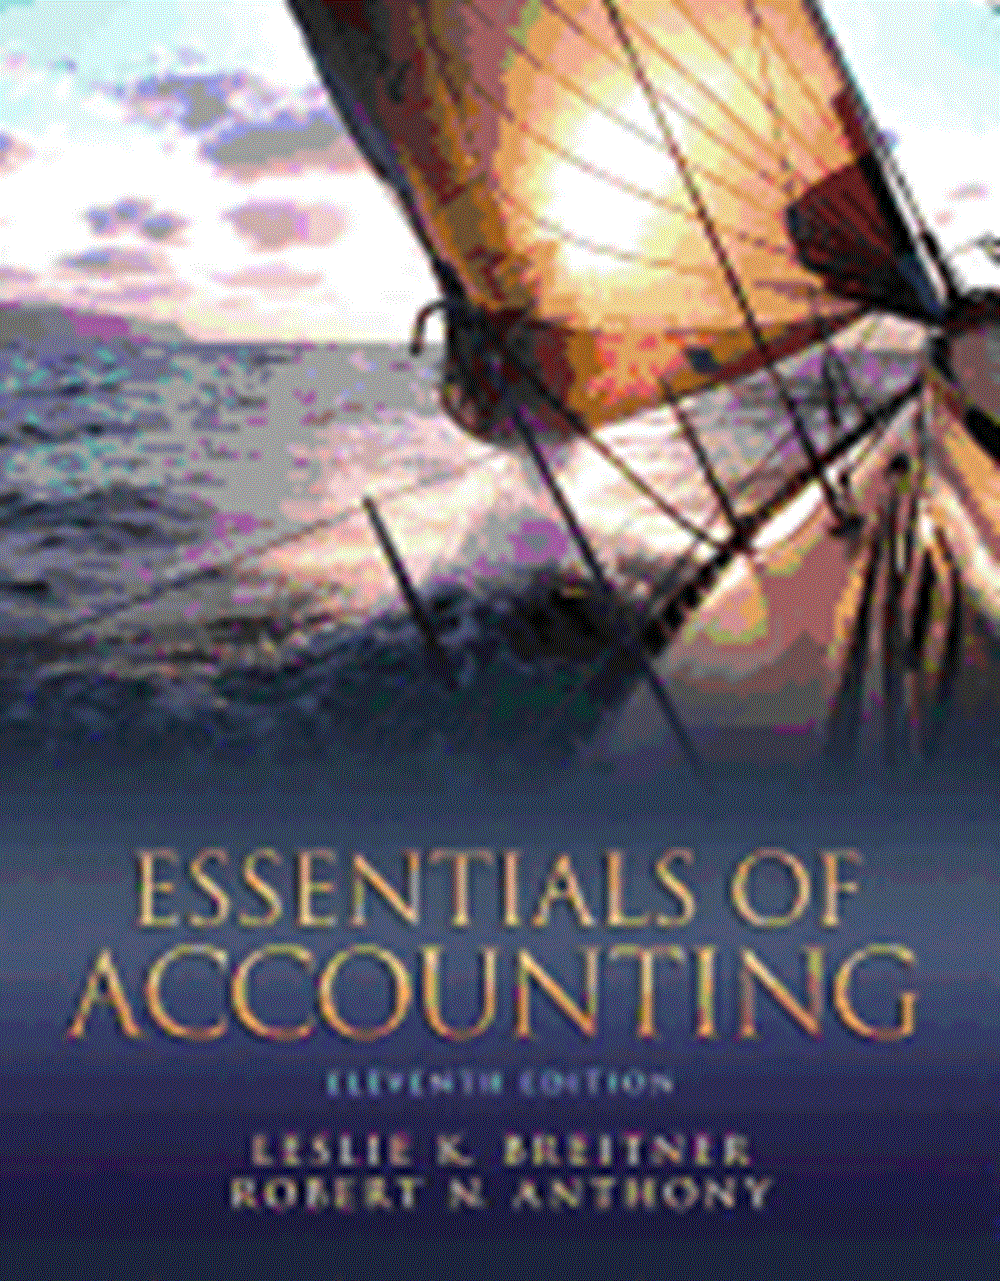 Essentials of Accounting